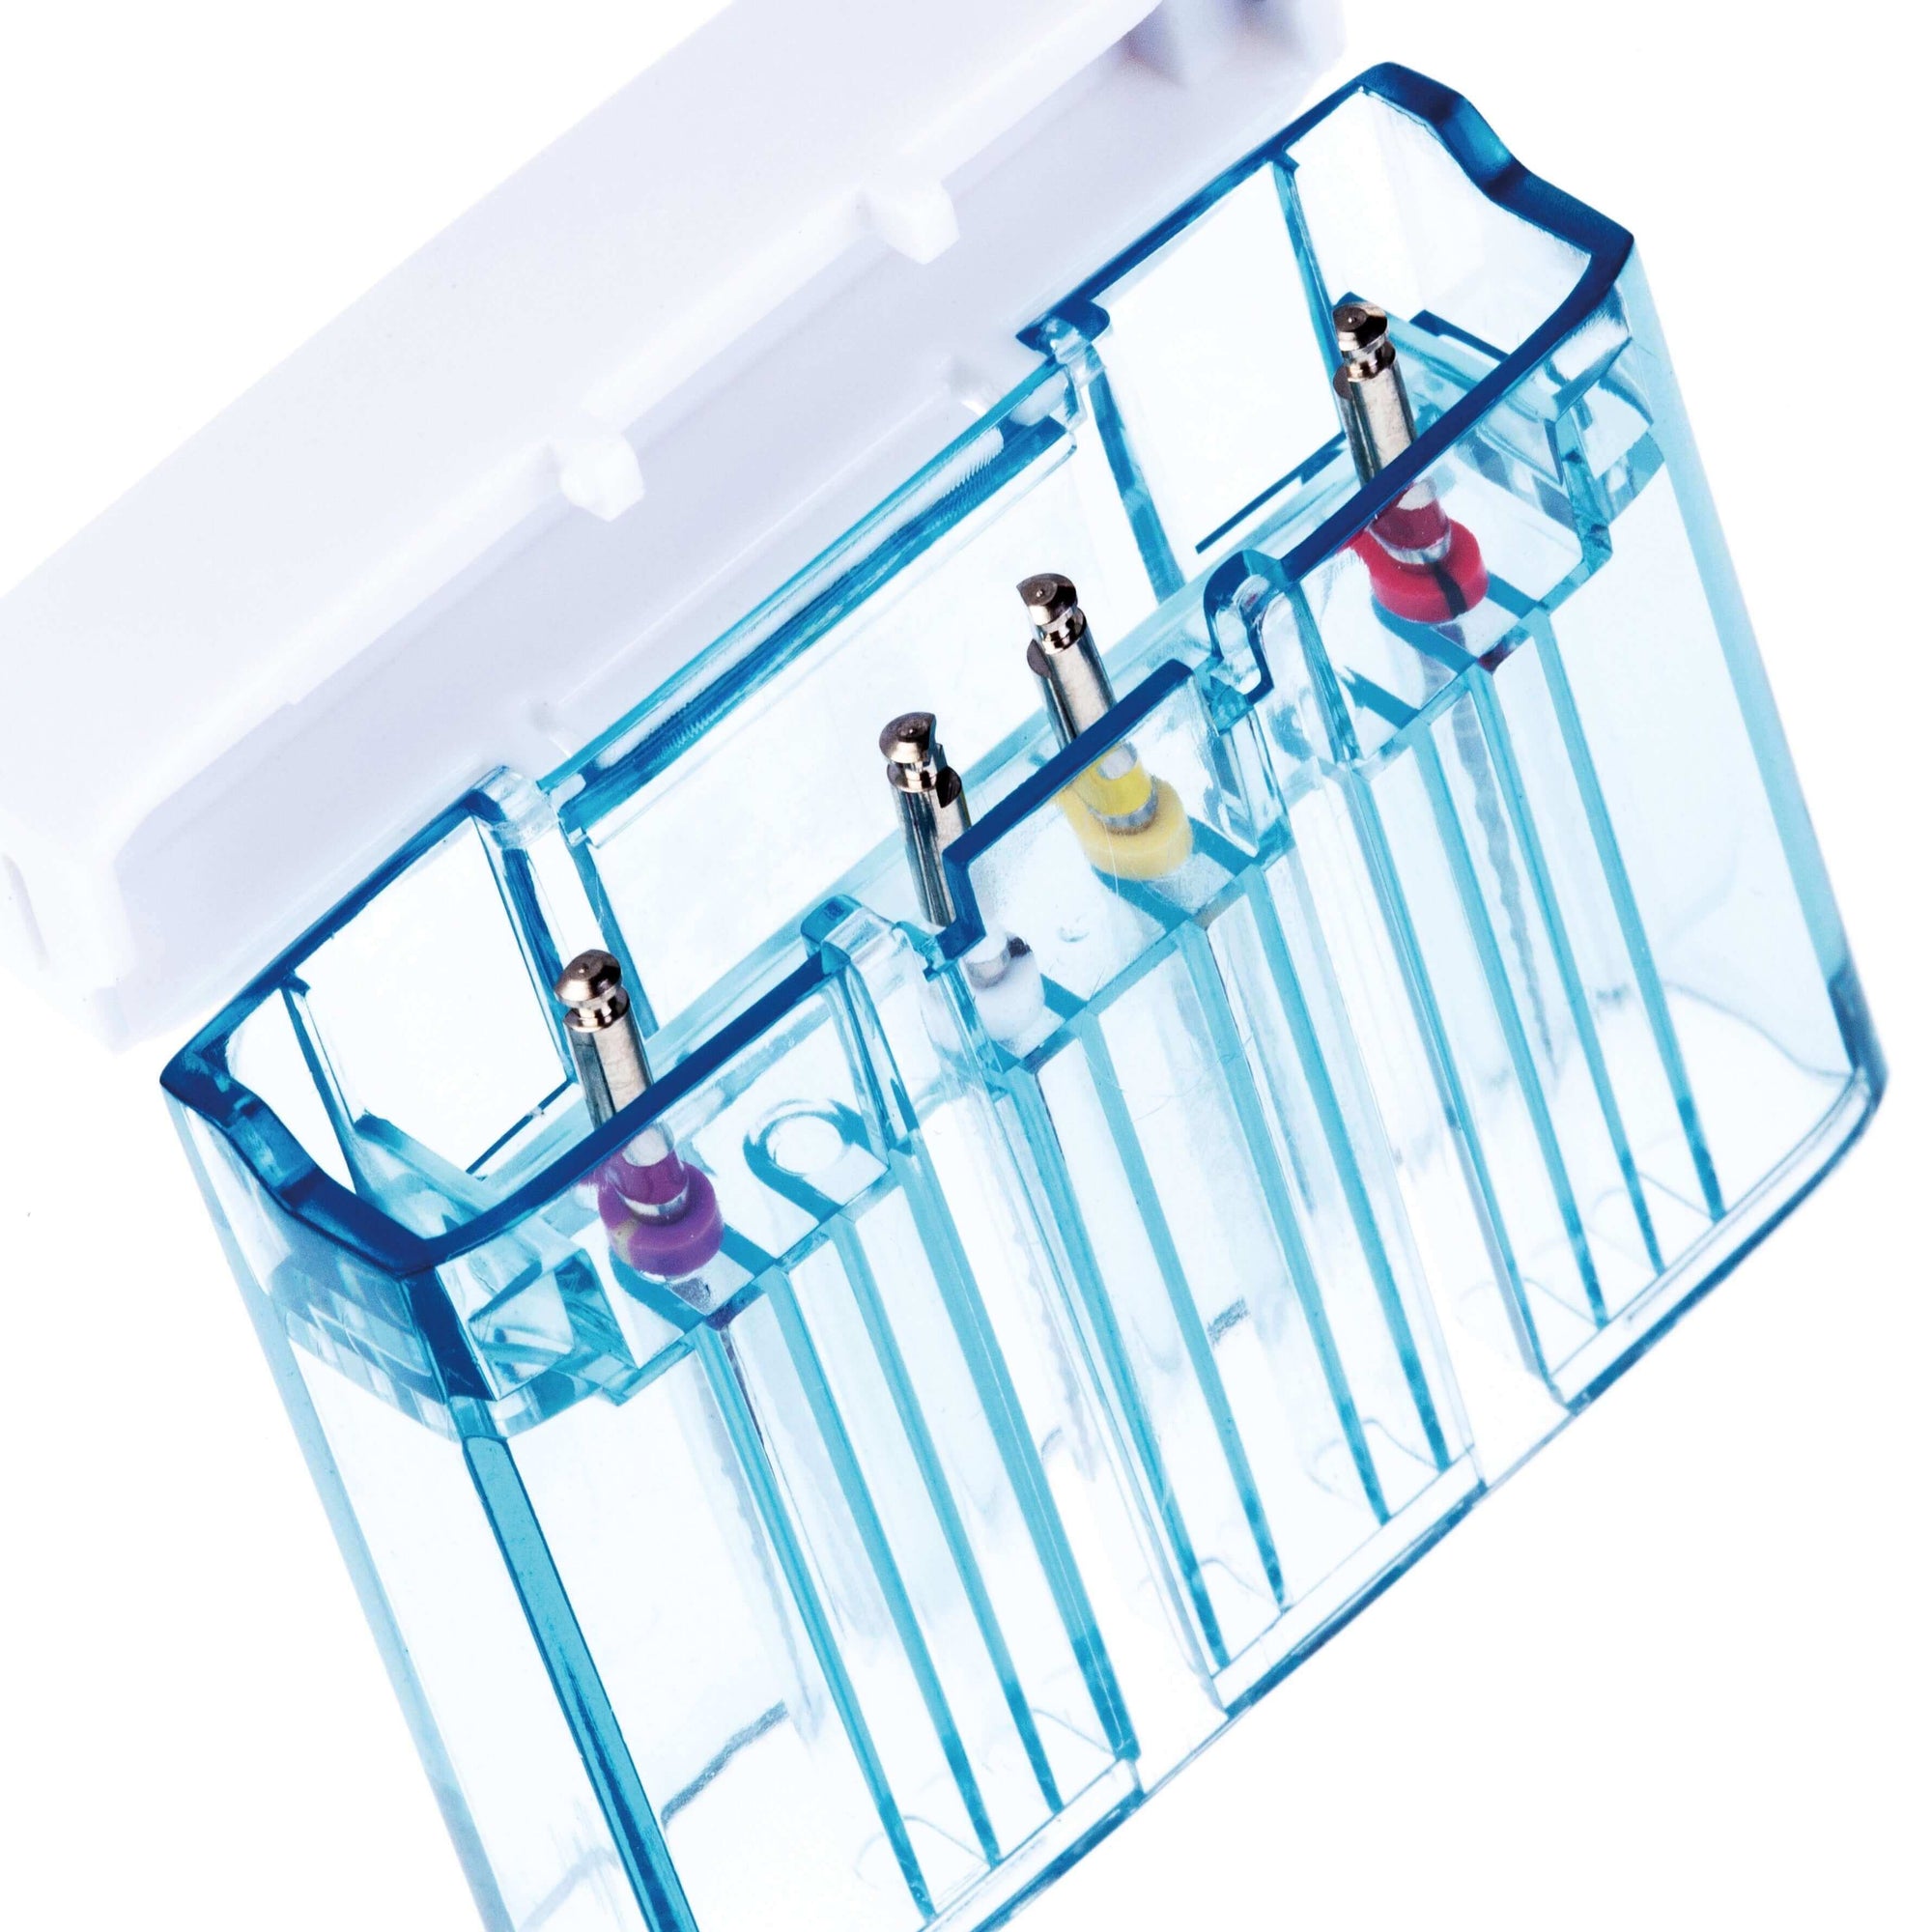 Autoclavable Organizer Organize your file system in this autoclavable box with ruler.